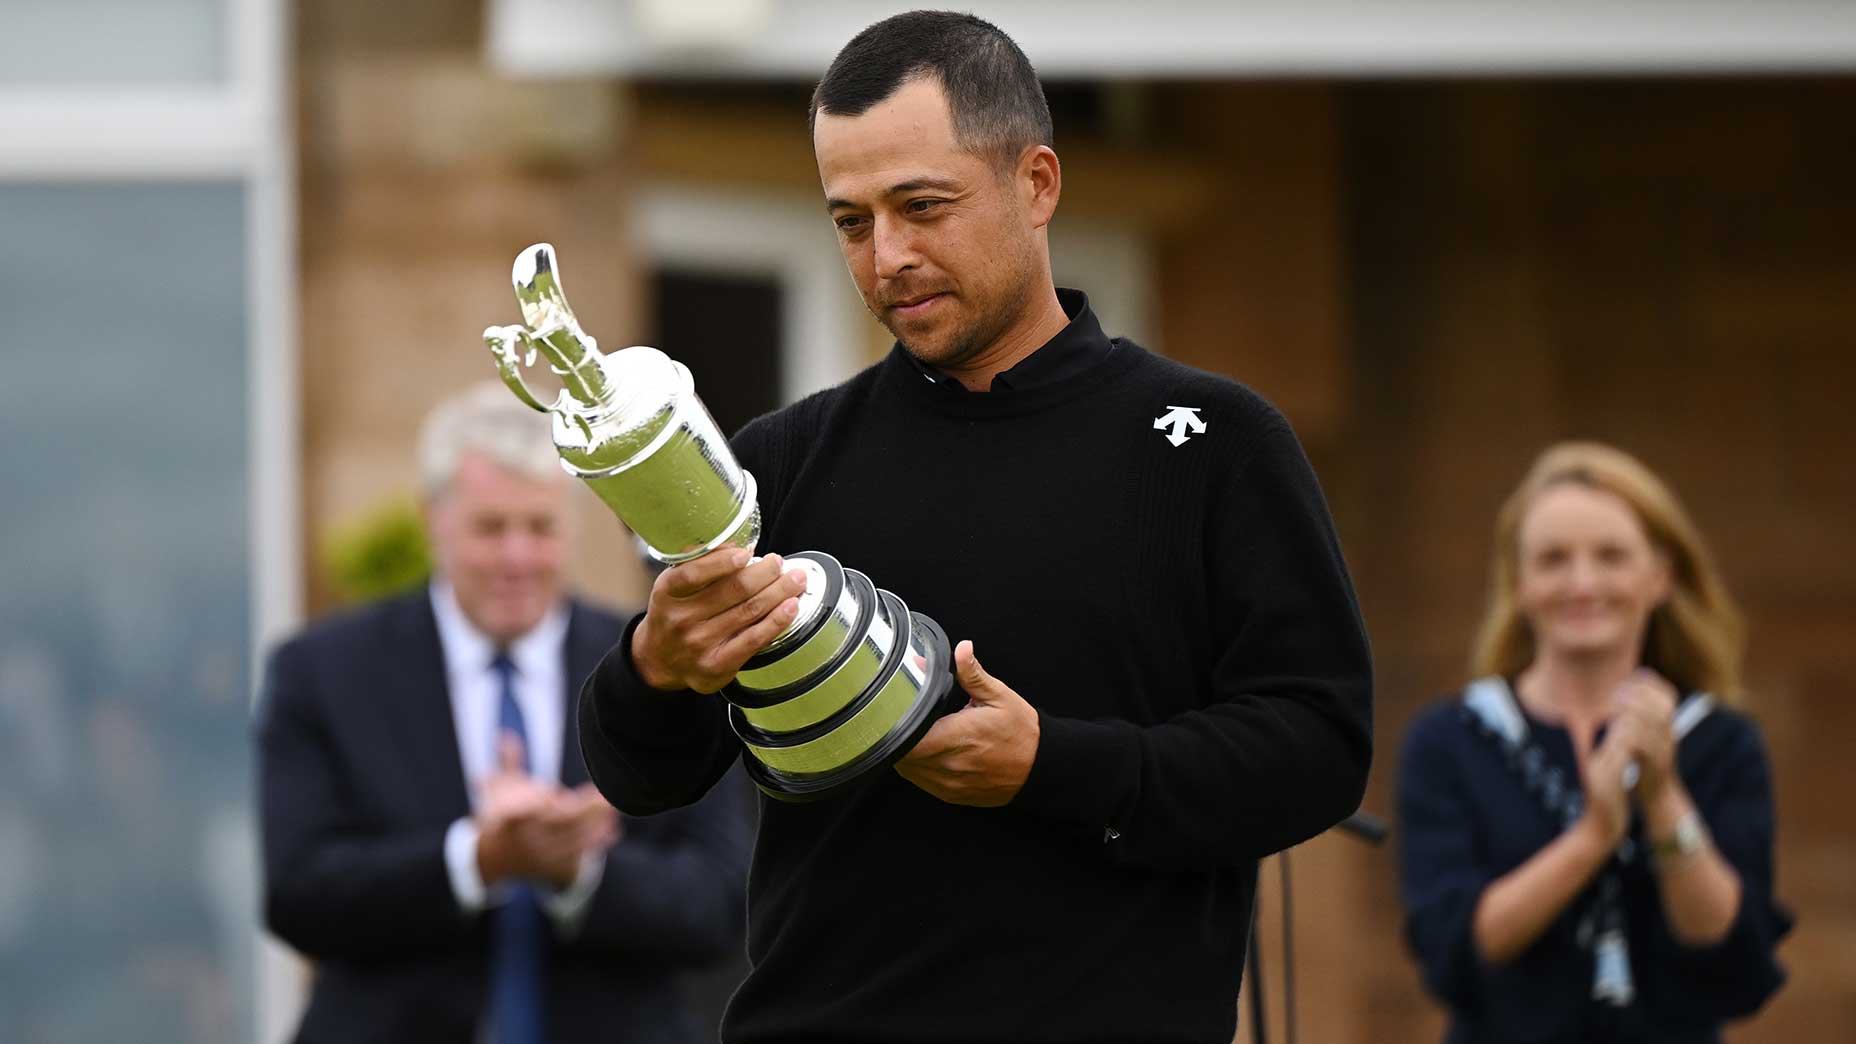 Xander schauffele looks at the claret jug after winning the 2024 open championship.